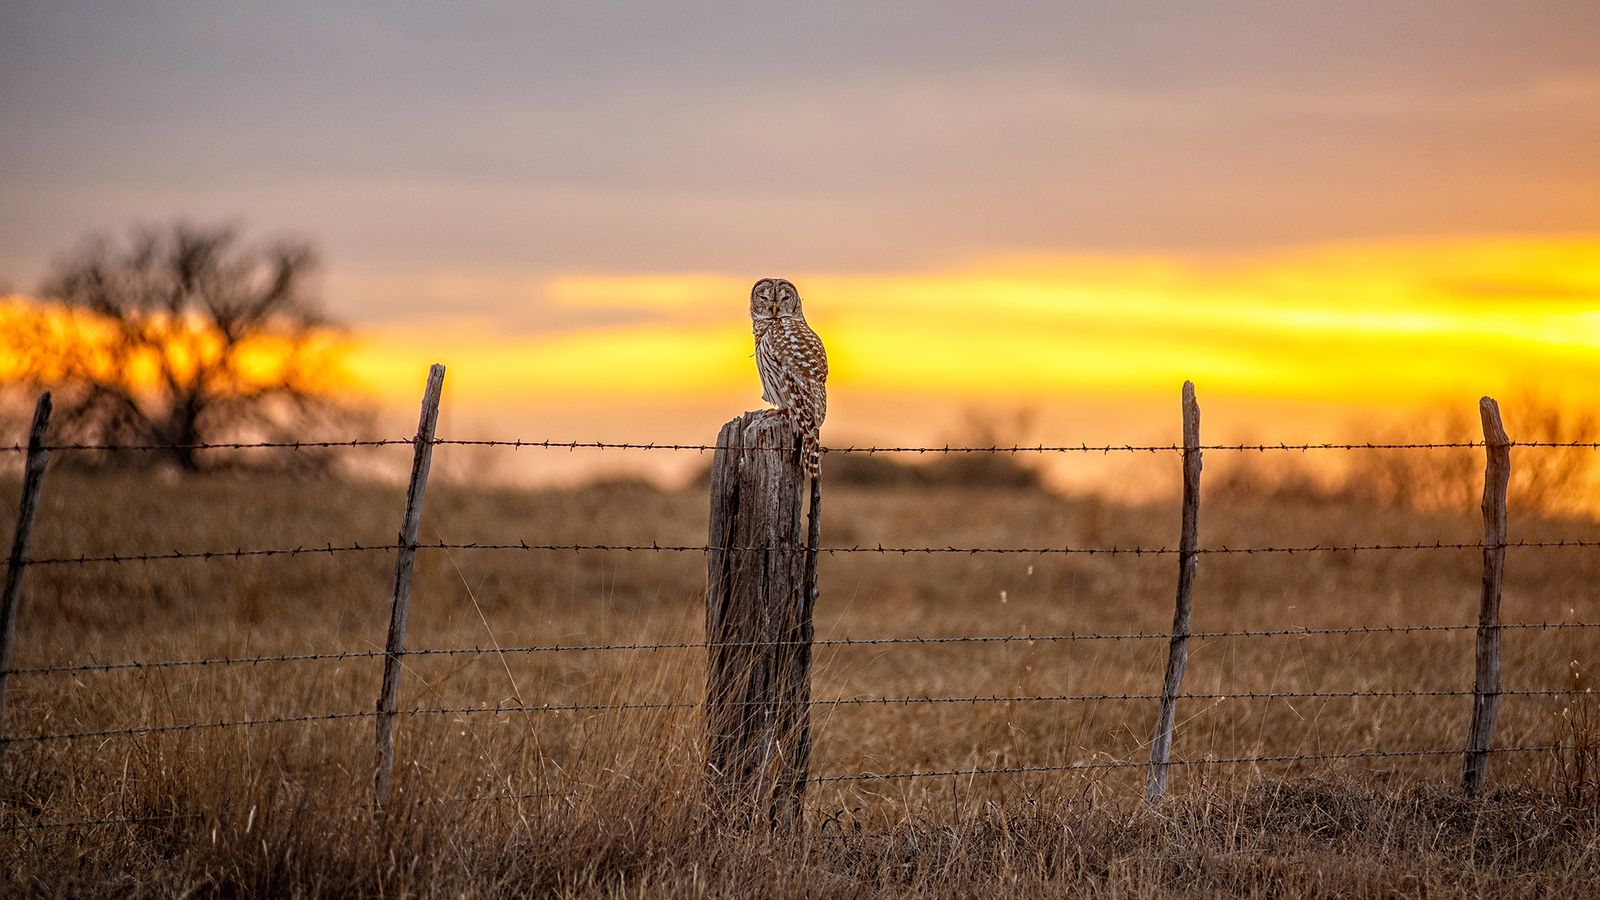 Barred Owl at Sunset